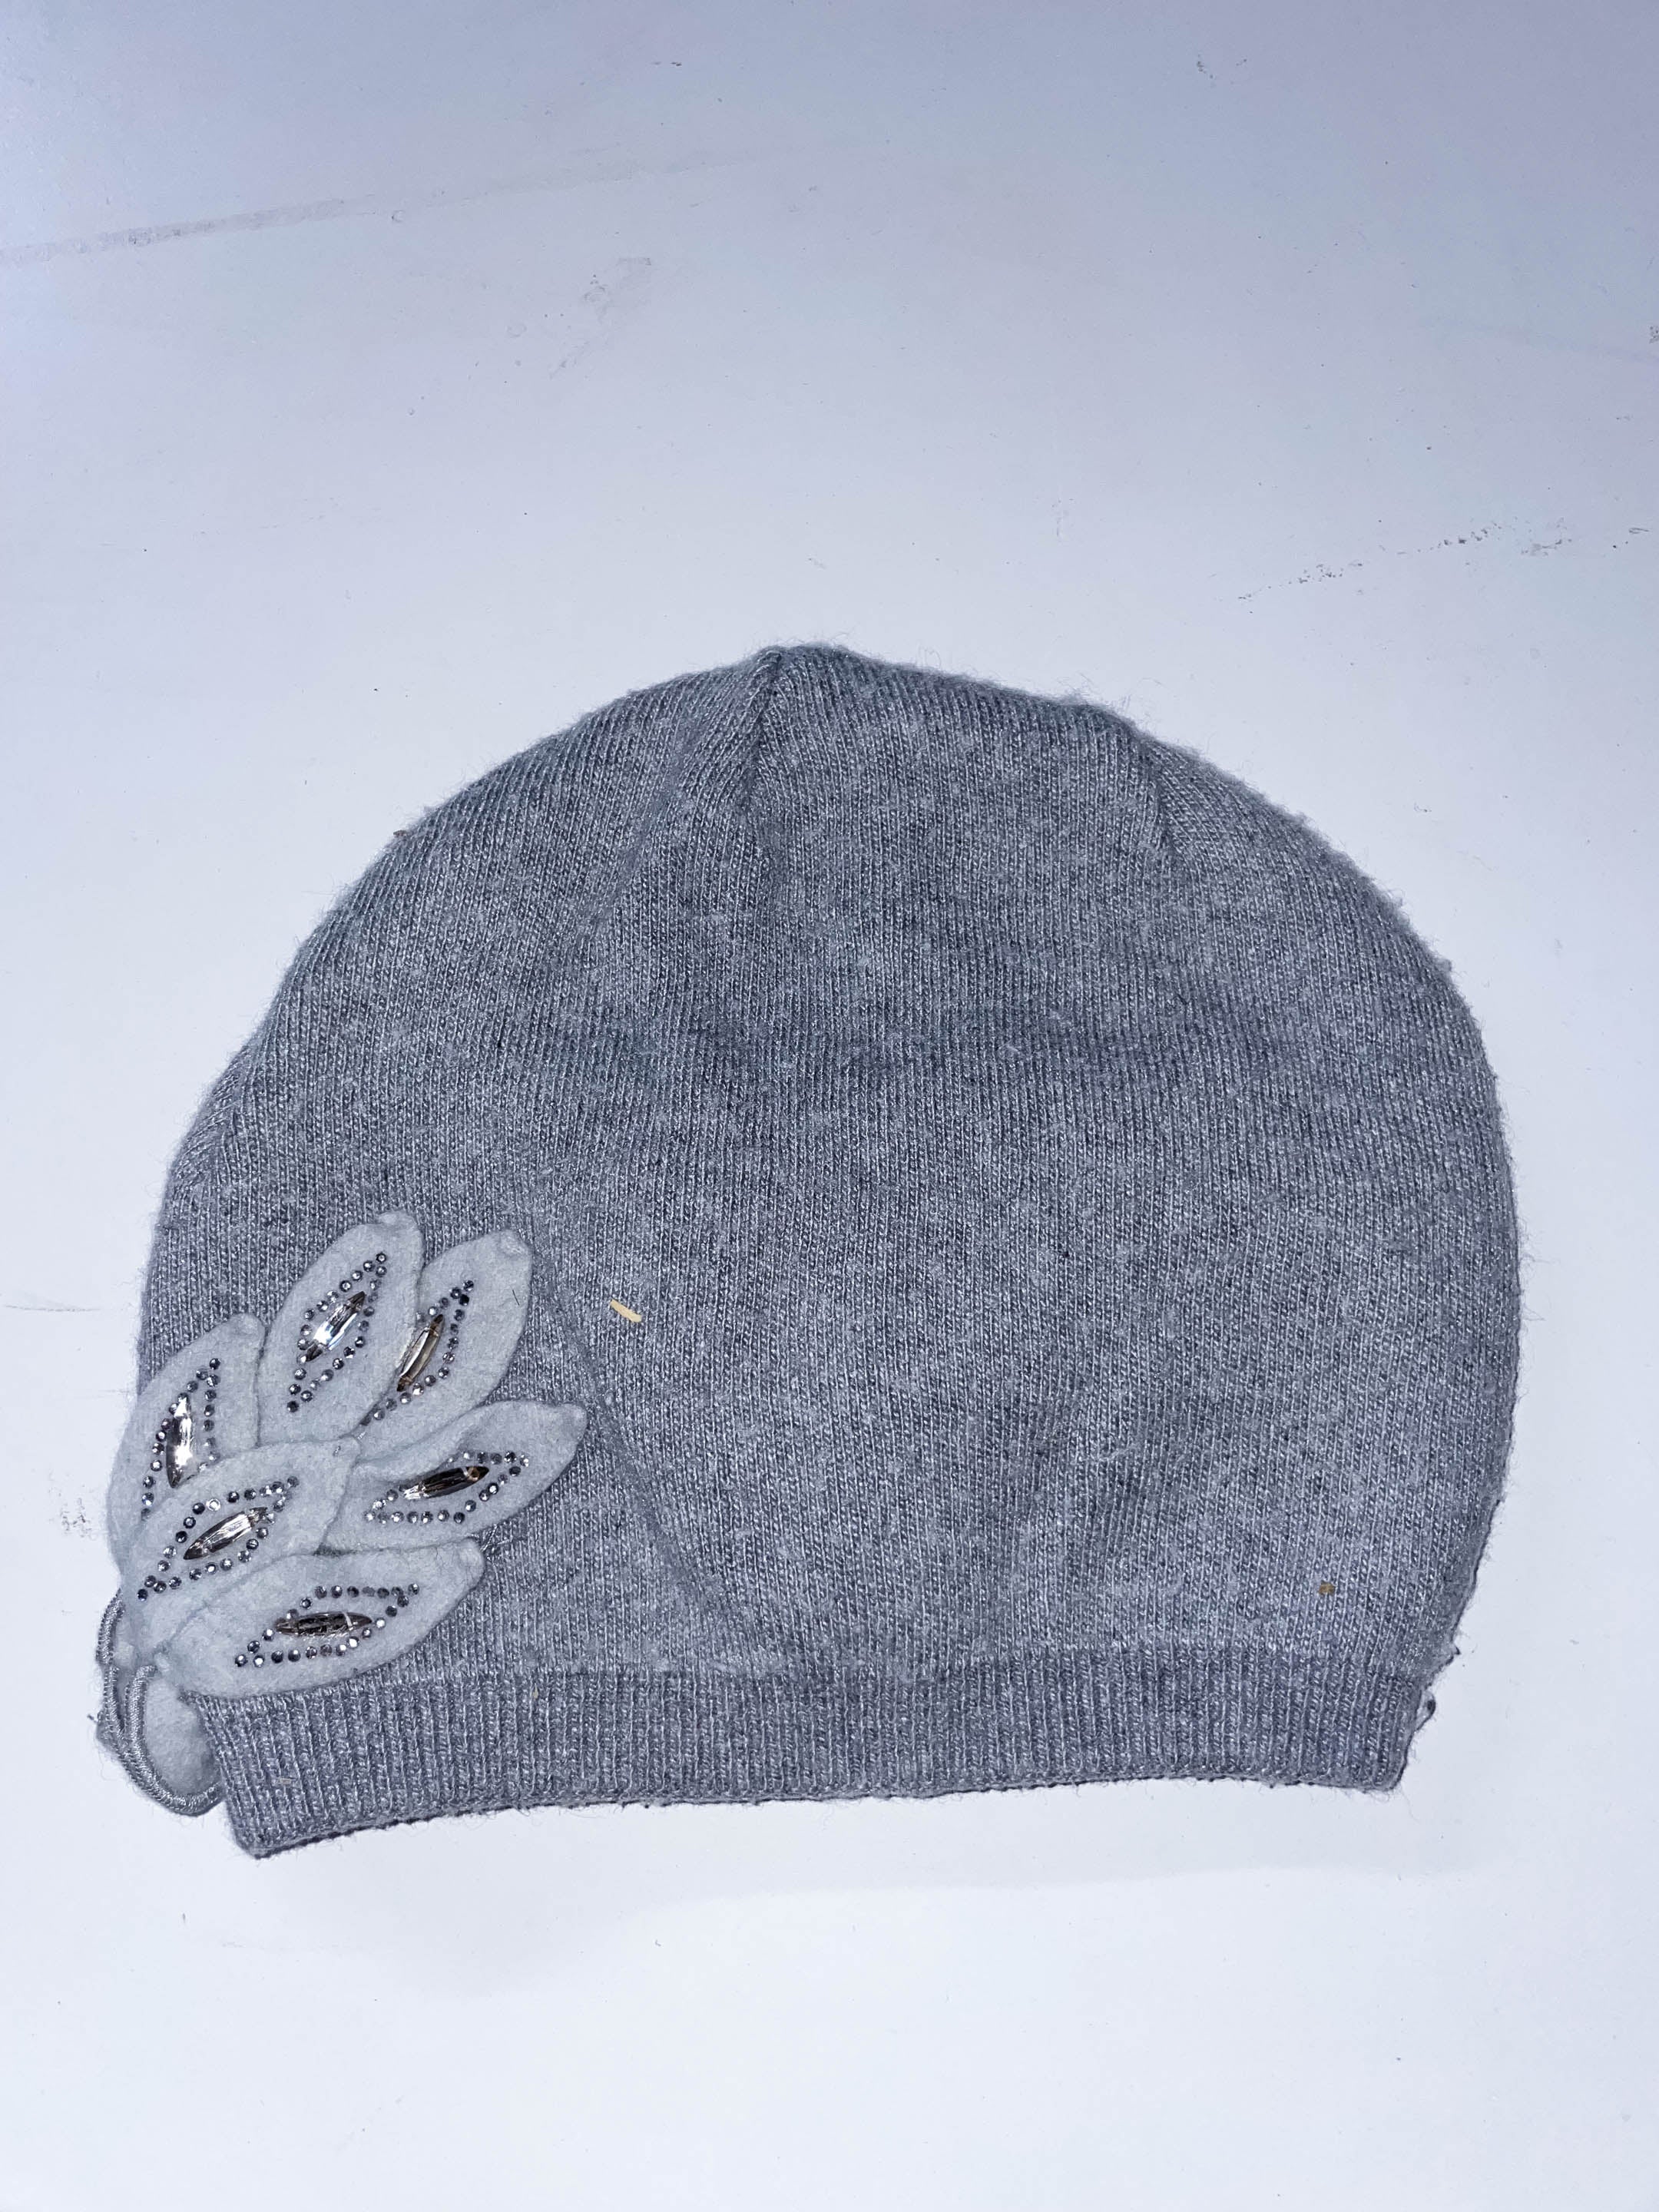 Vintage grey womens beanie hat with flower embroidery